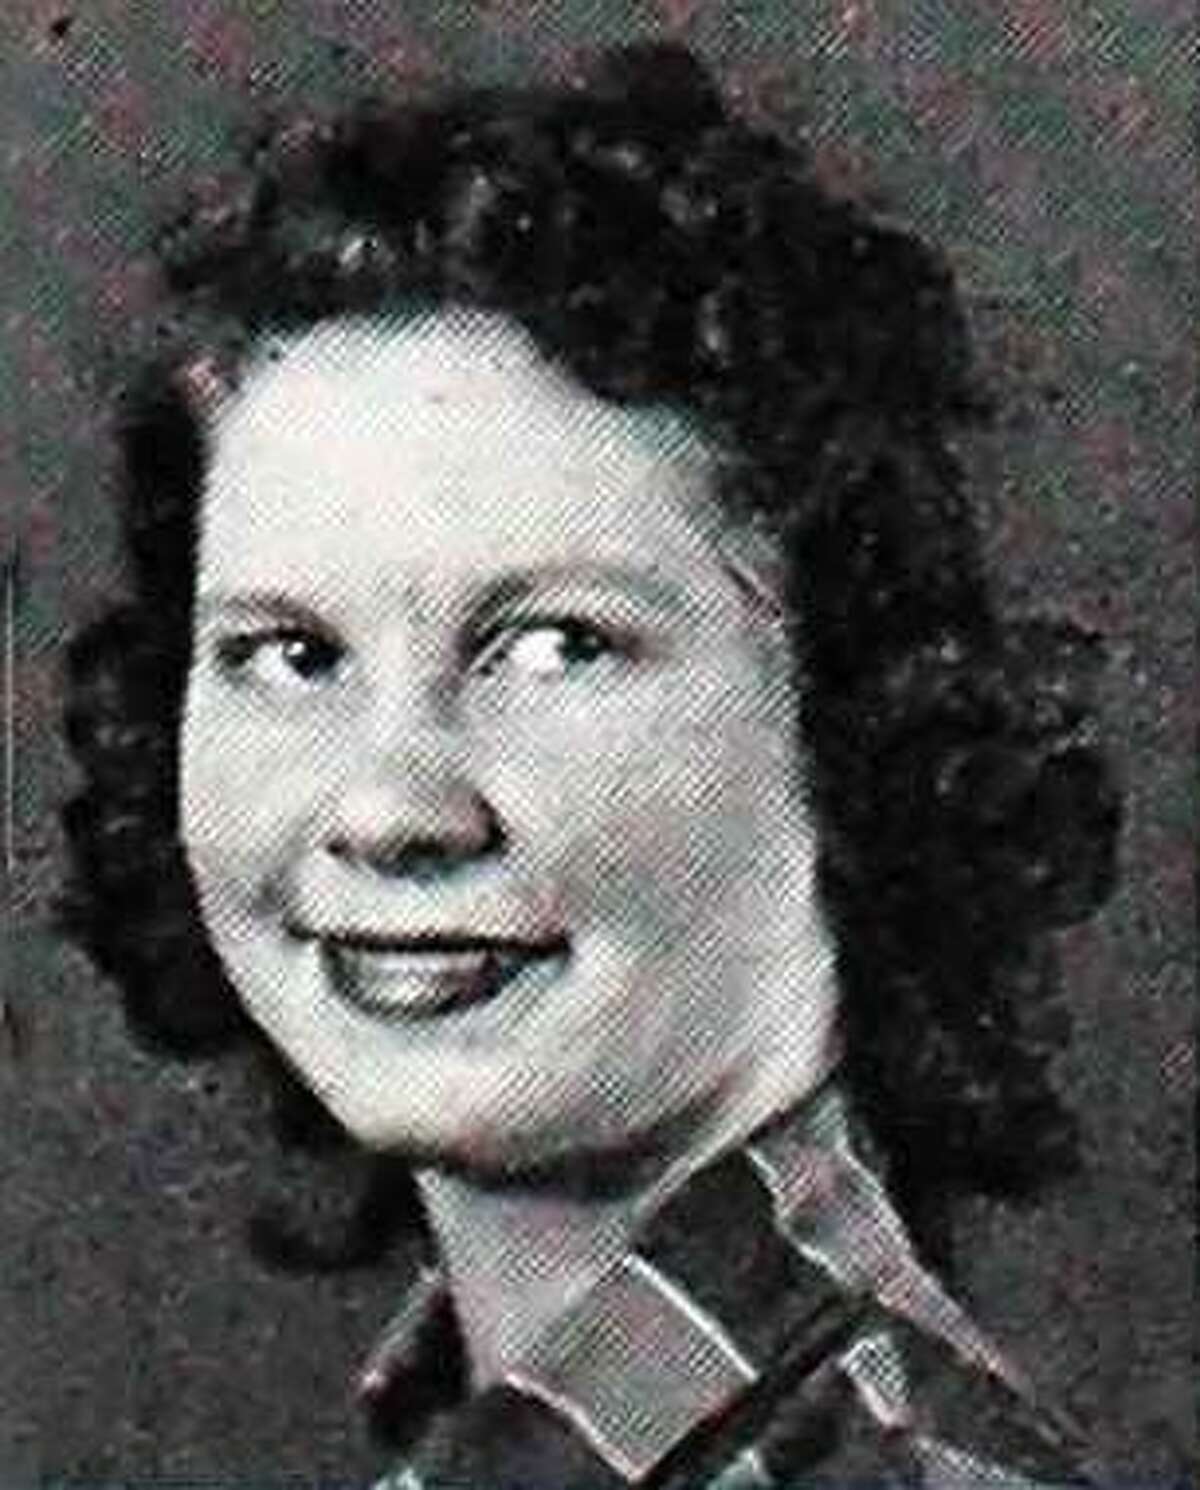 Dorthy Jenkinson, seen in this 1941 Incarnate Word College yearbook photo, graduated from the Santa Rosa School of Nursing in downtown San Antonio in 1943. She joined the Army in 1944 and served through the end of World War II. She will turn 100 in December 2021.